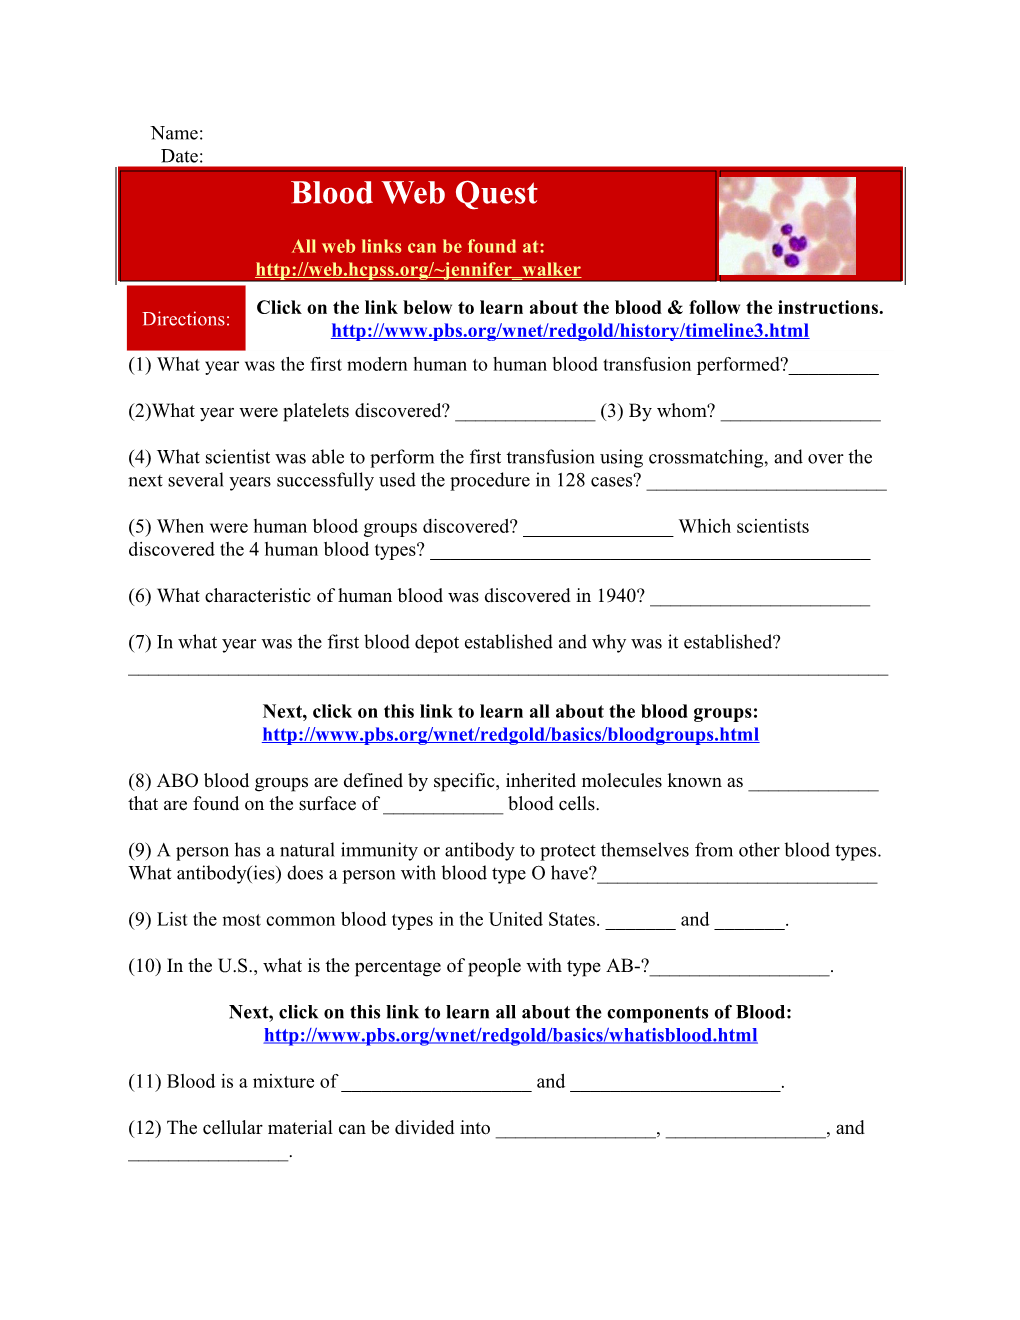 Physiology: Blood Web Quest s2